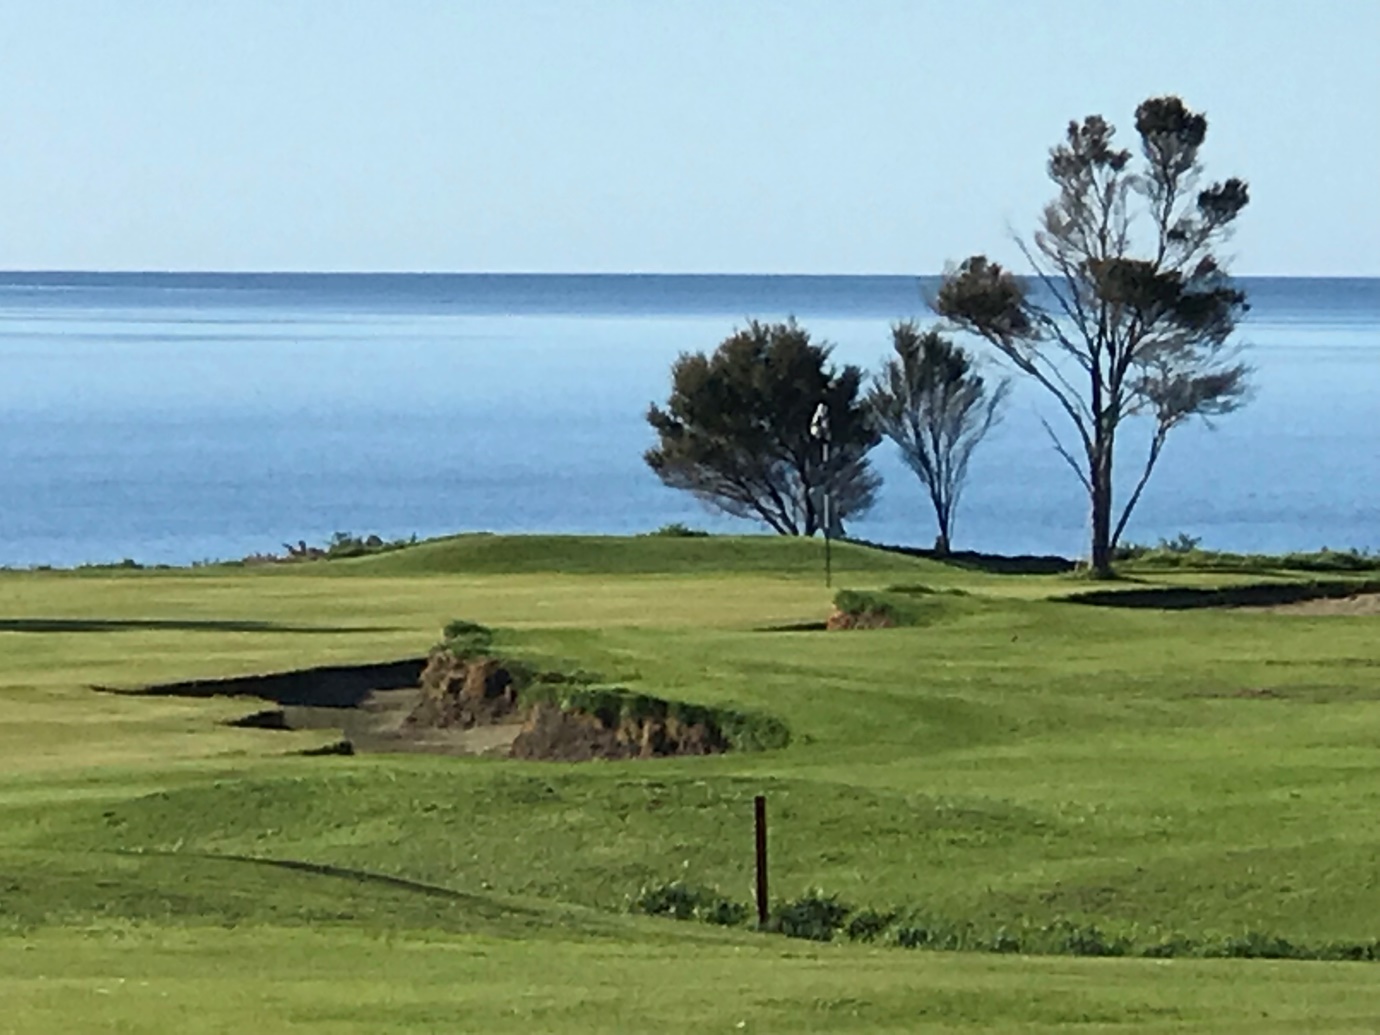 The easy green – no problem at all apart from the 40m long bunker and the cliff behind…